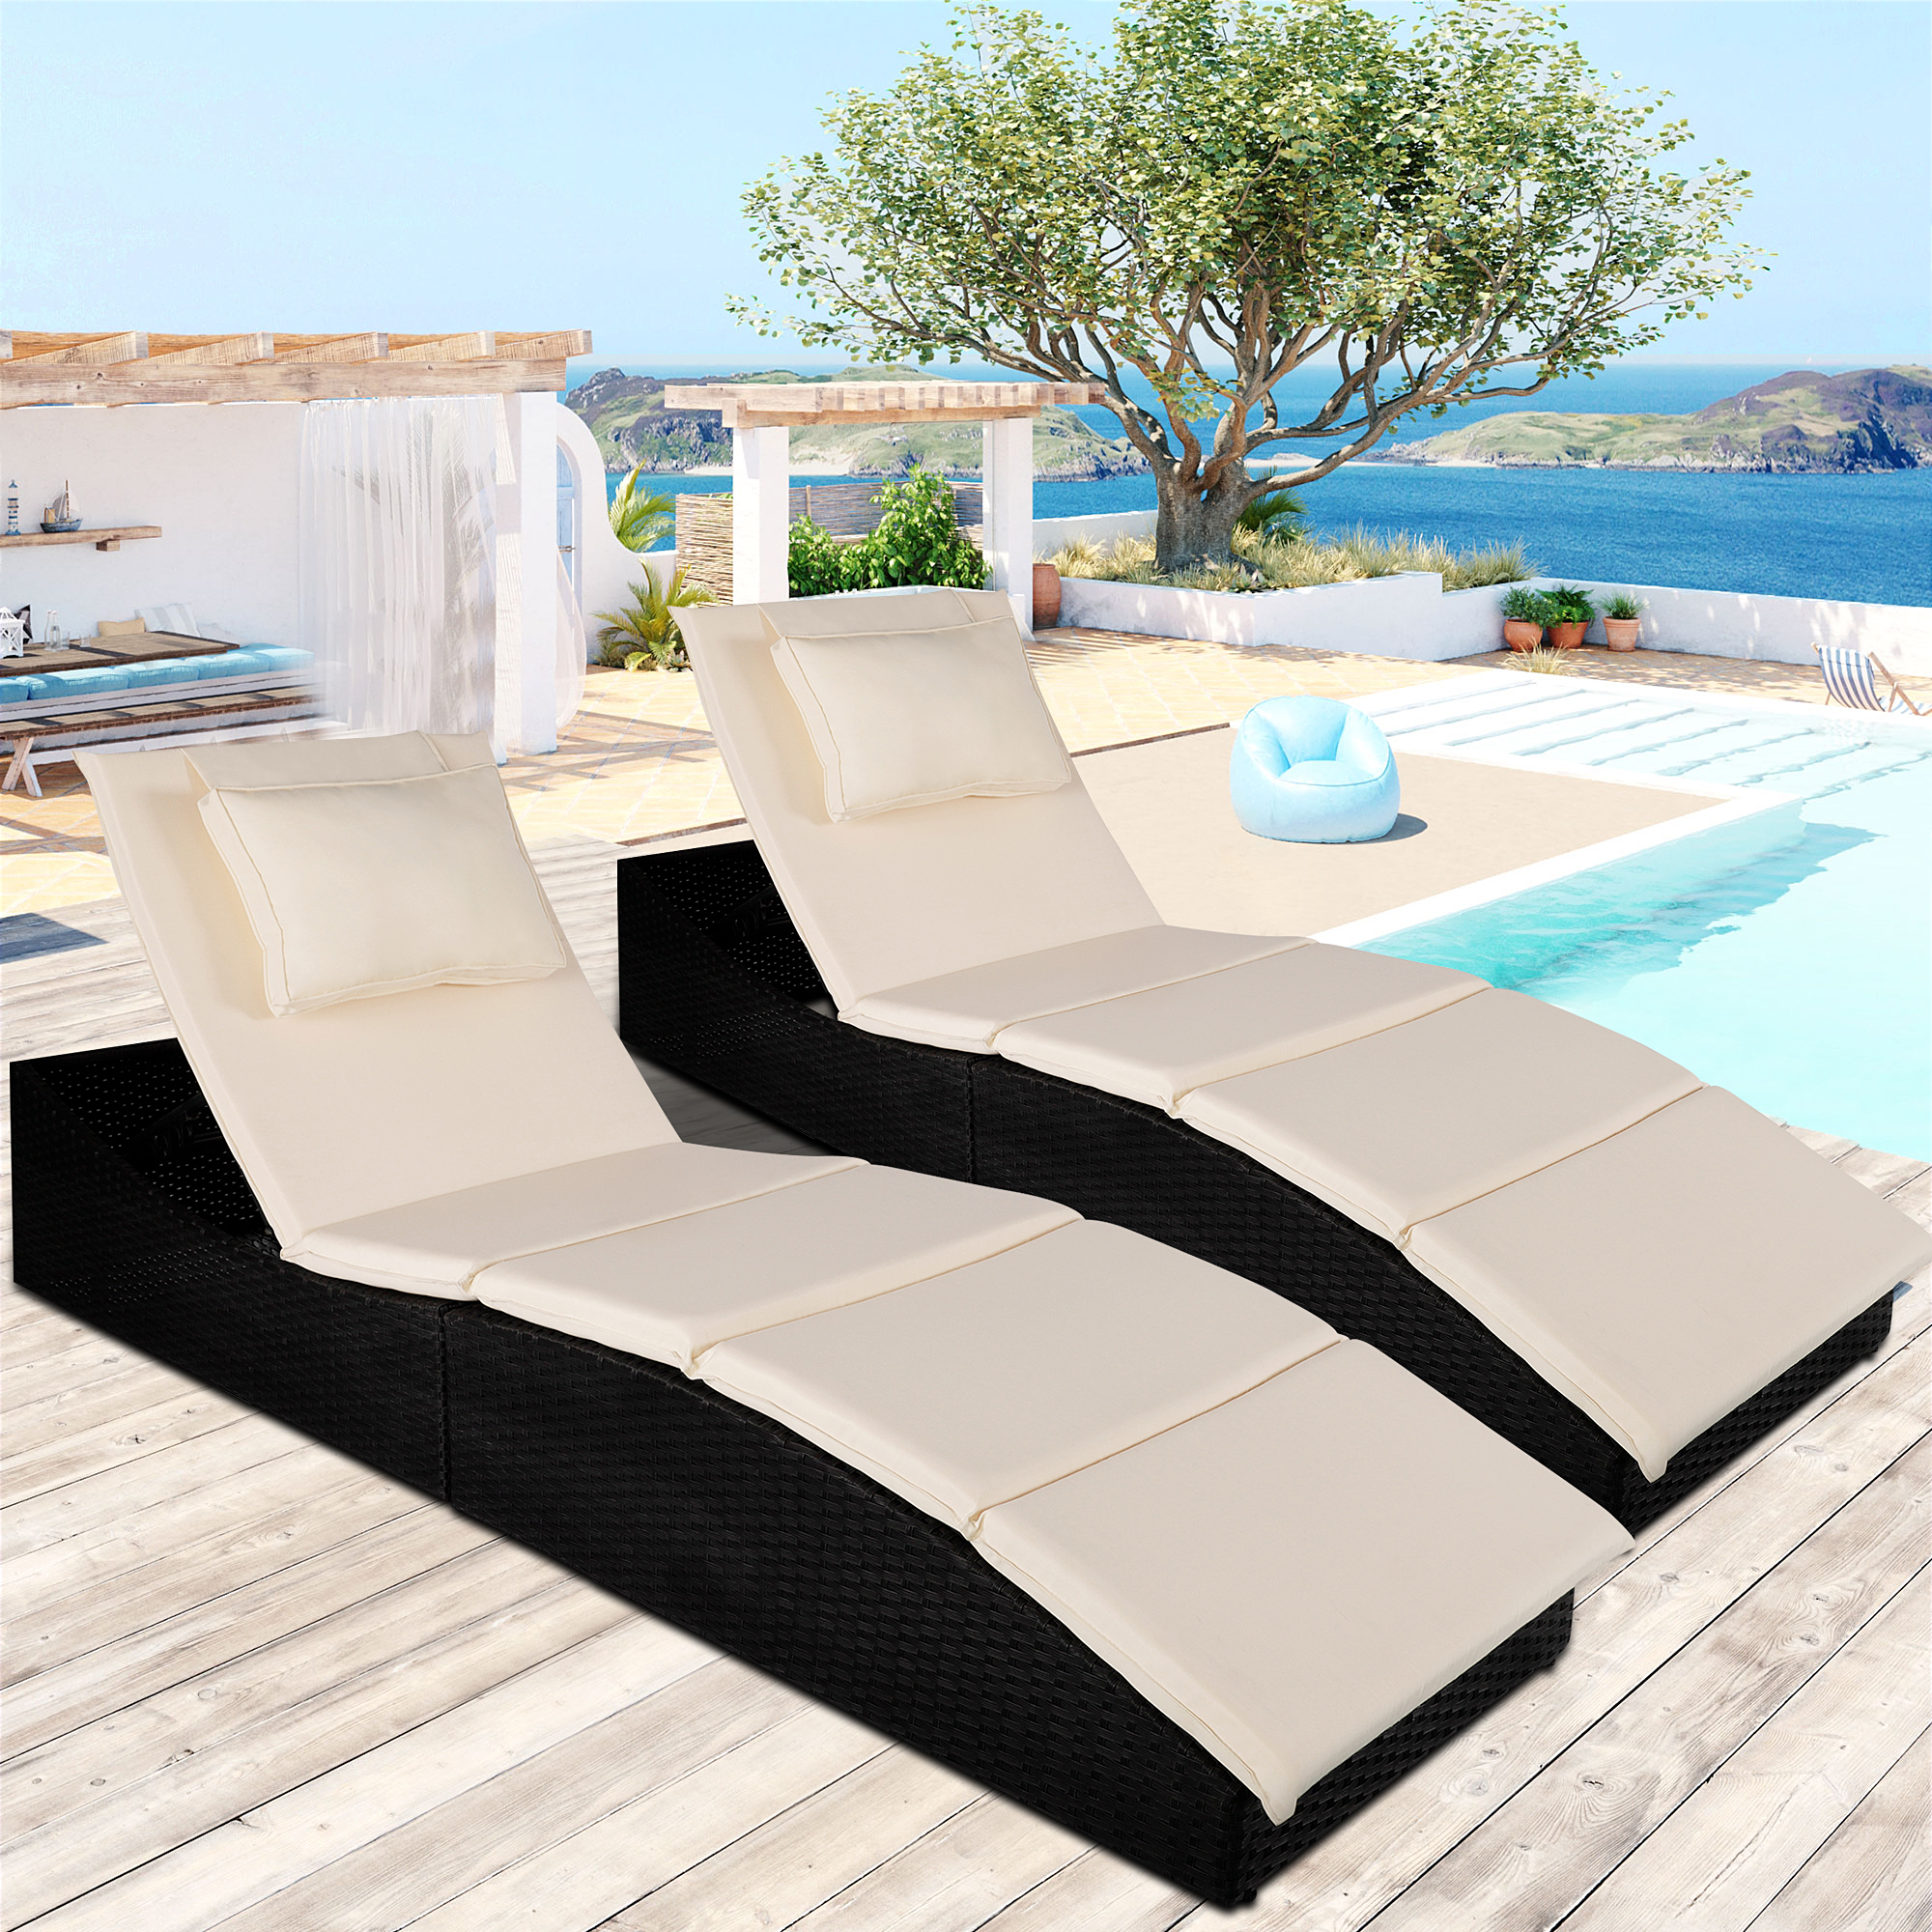 2 Piece Chaise Lounge Chairs Outdoor, enyopro Wicker Patio Chaise Loungers with Cushion, Adjustable Sun Chaise Lounge Furniture, Reclining Backrest Chaise Lounge for Back Pool Porch Garden, K3735 - image 4 of 11